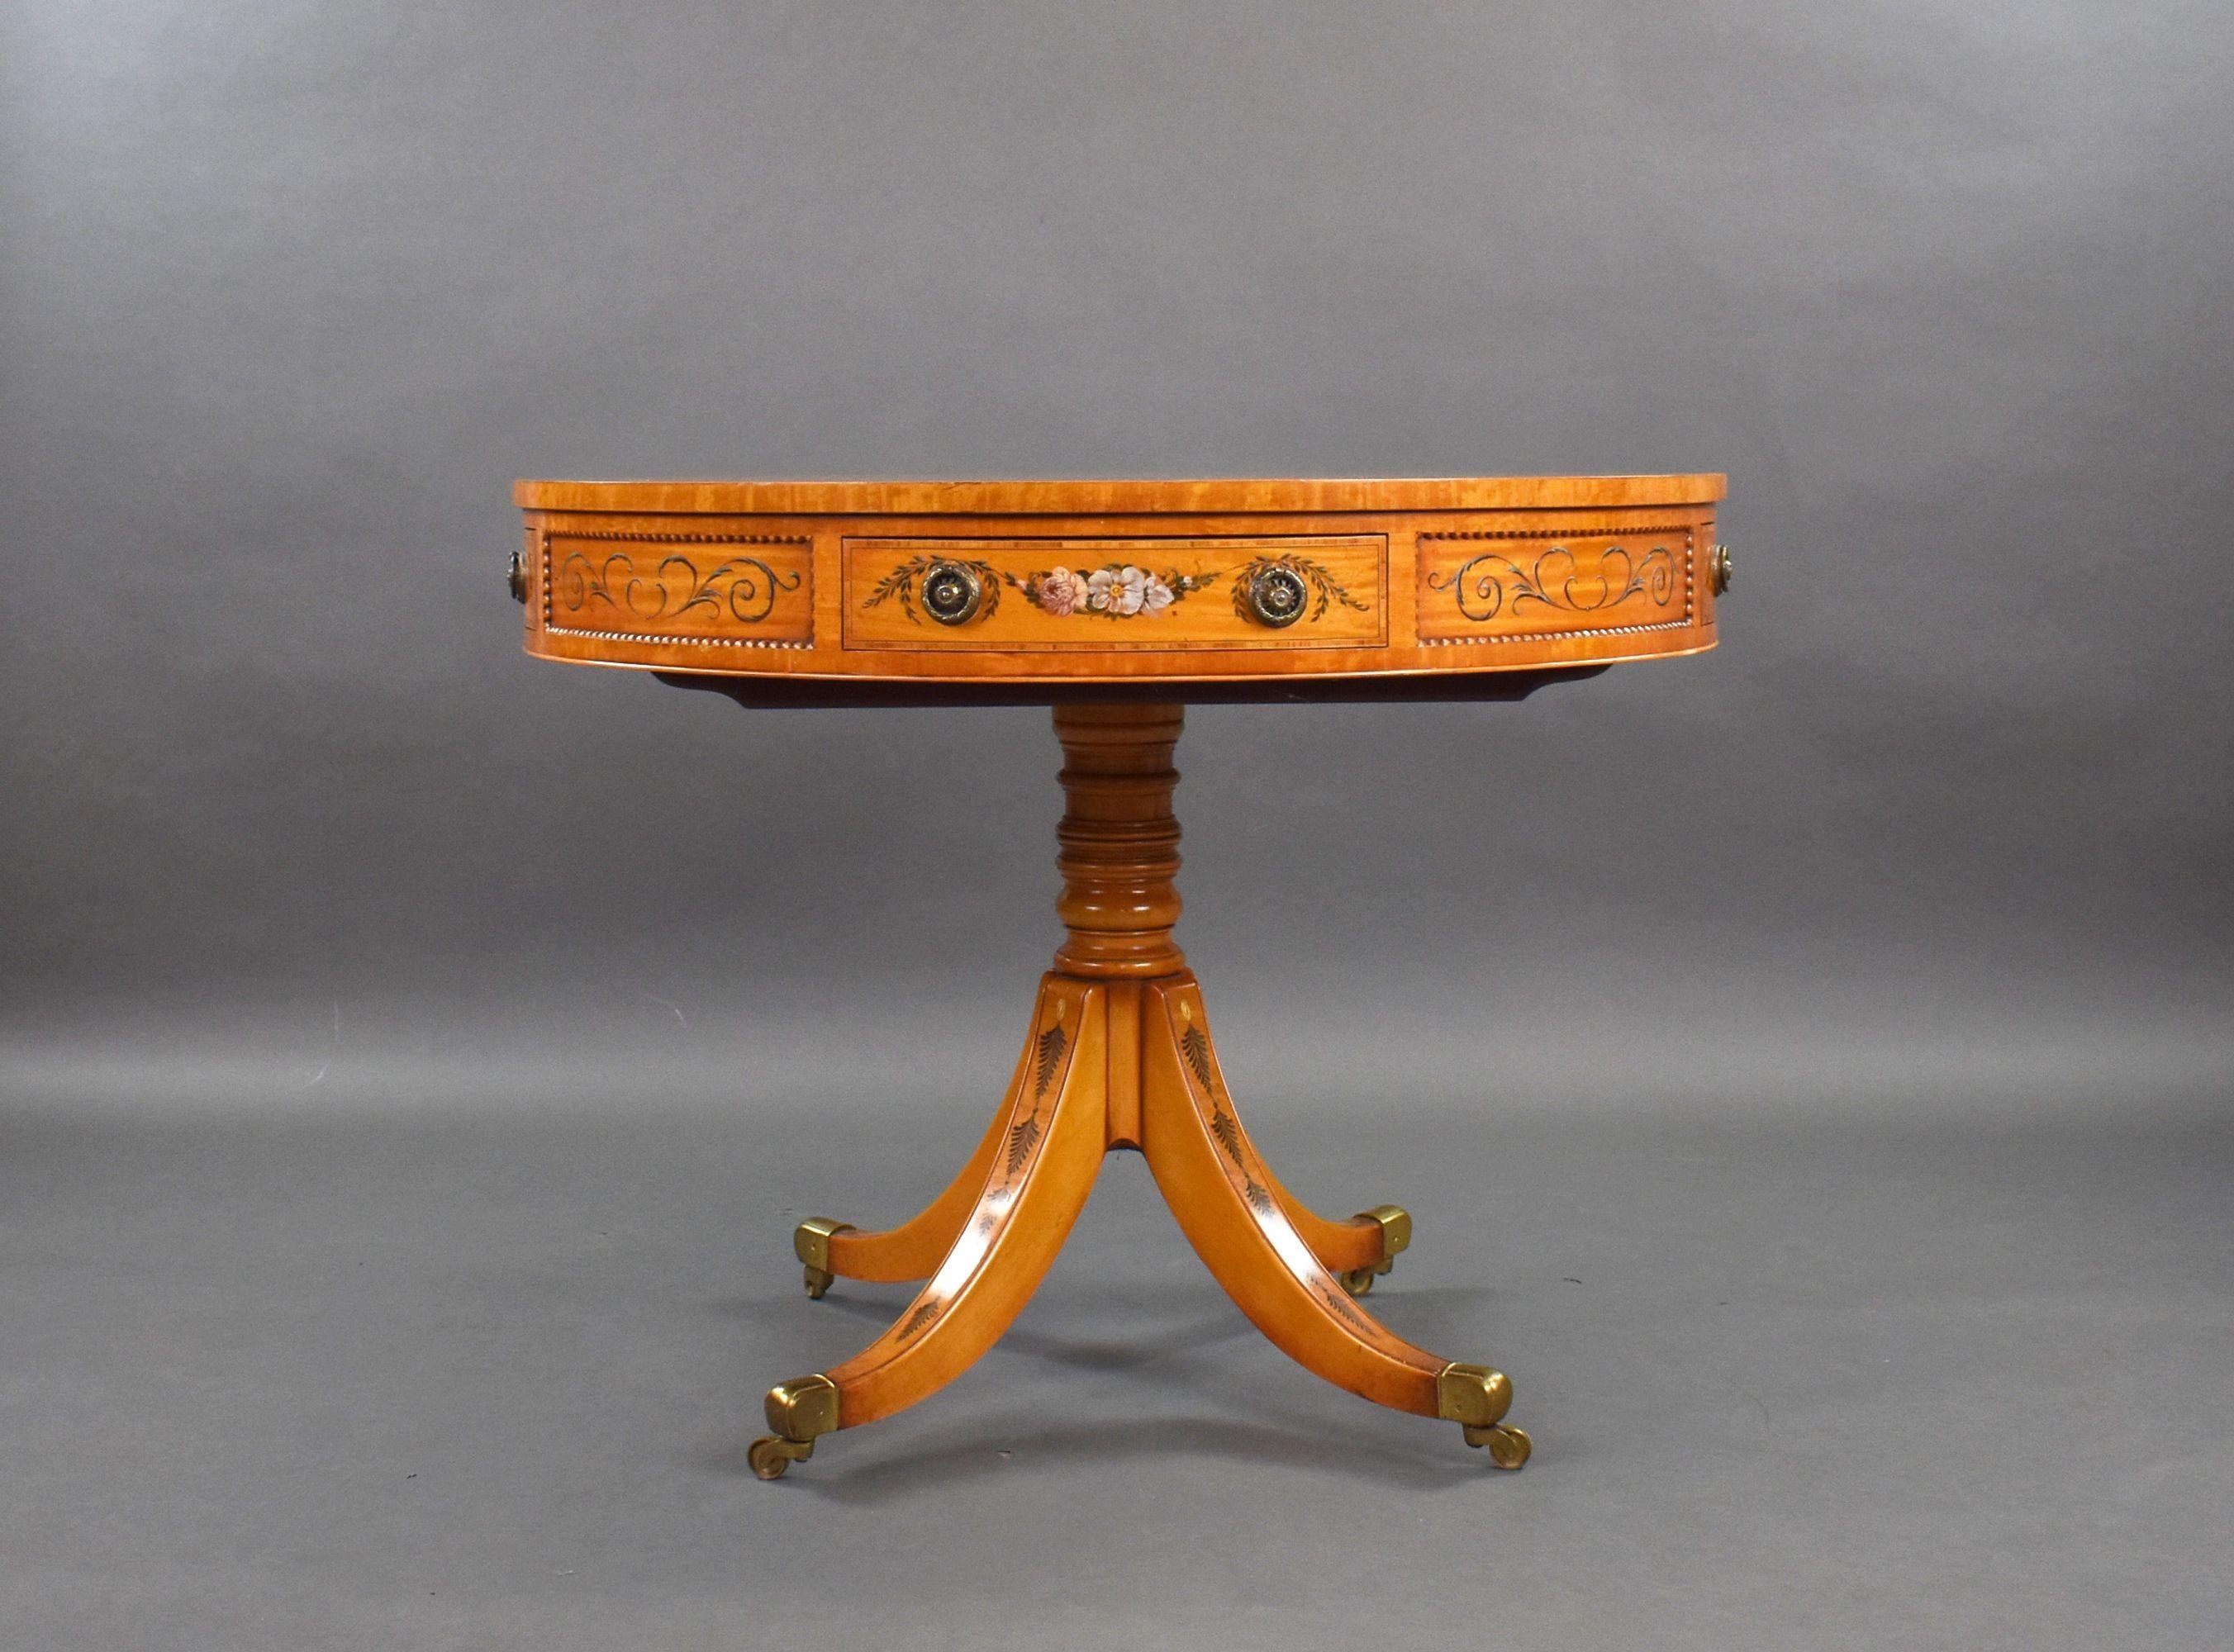 For sale is a good quality Edwardian hand painted satinwood drum table, having floral decoration to the centre and edges of the top, above four drawers, over a turned stem standing on splayed legs raised on original brass castors. The table remains